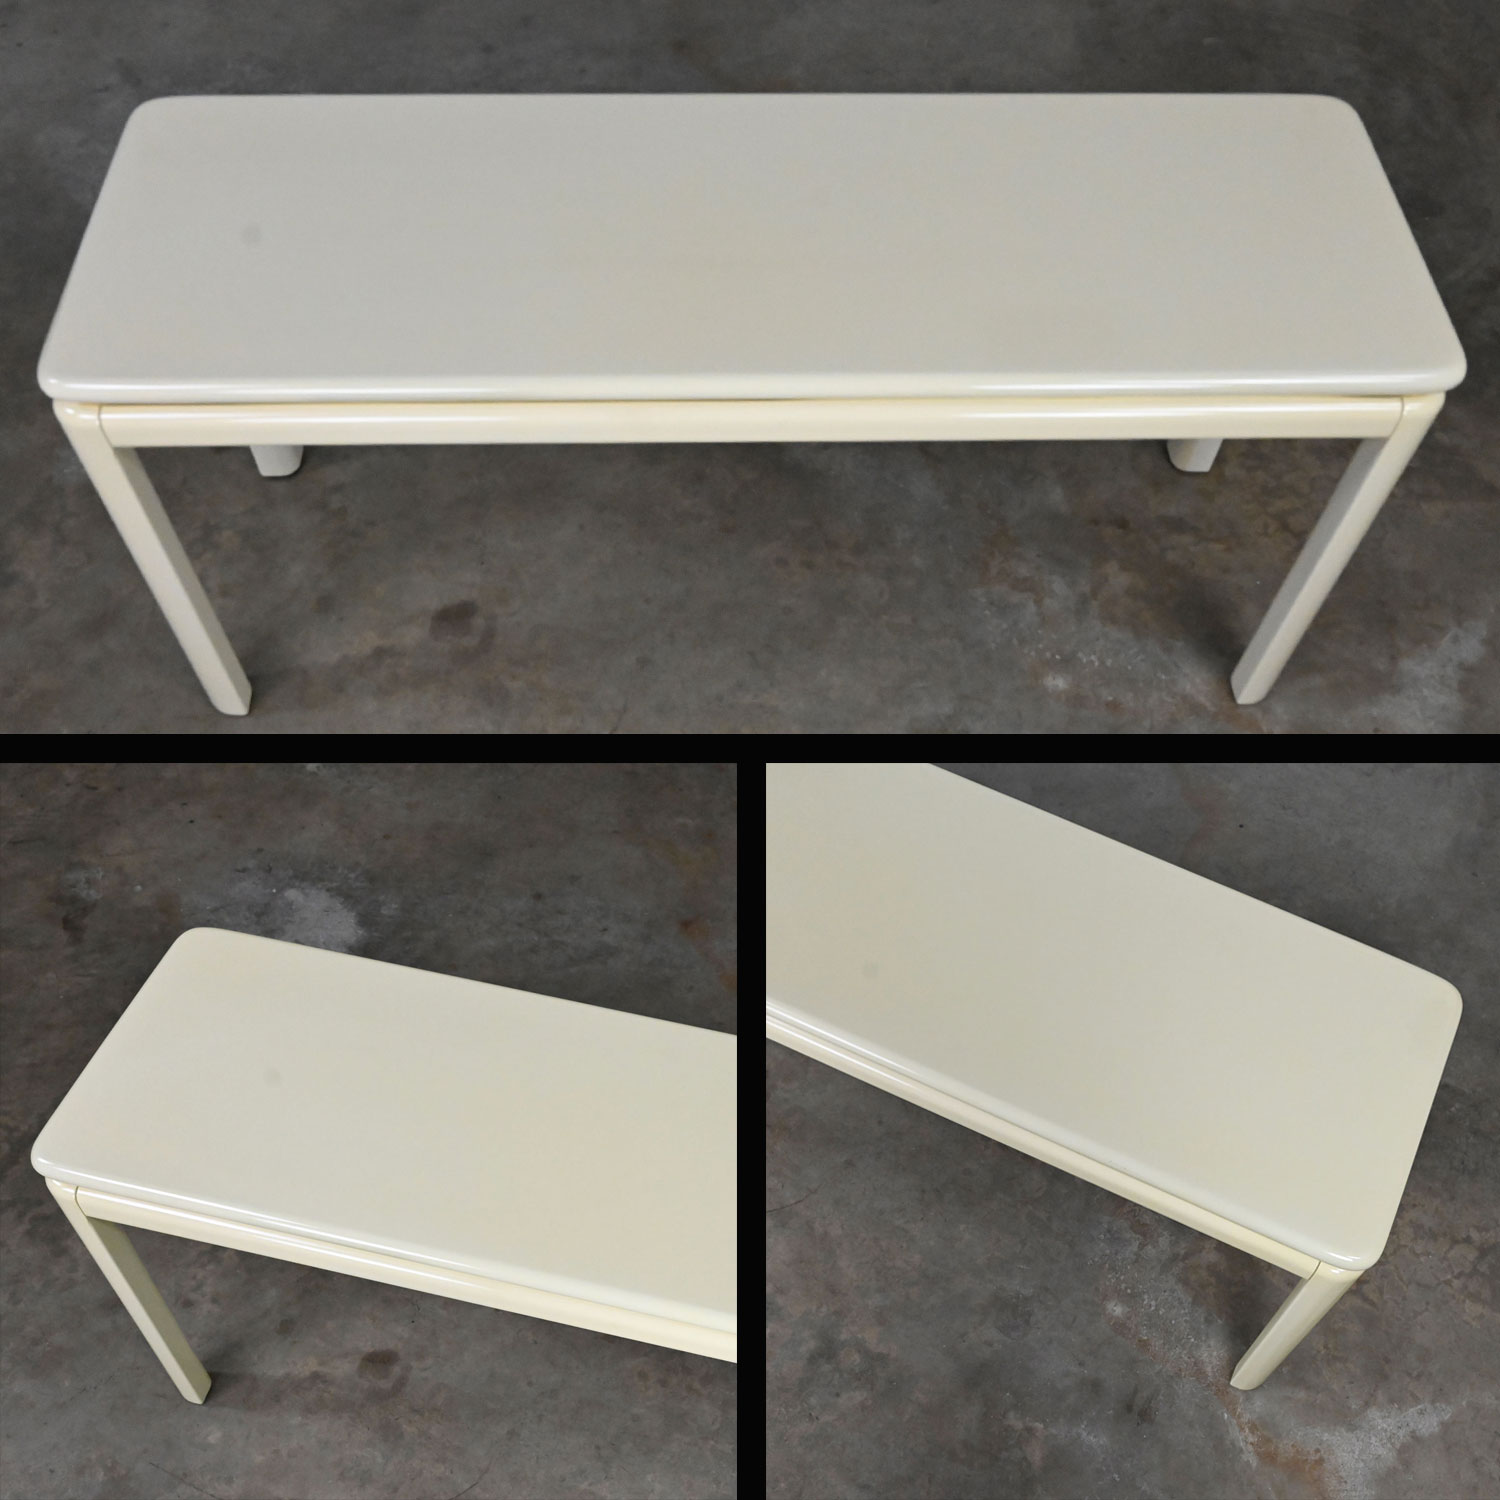 Vintage Modern or Art Deco Revival Lane Sofa Console Table in White Lacquer with Brass Trim